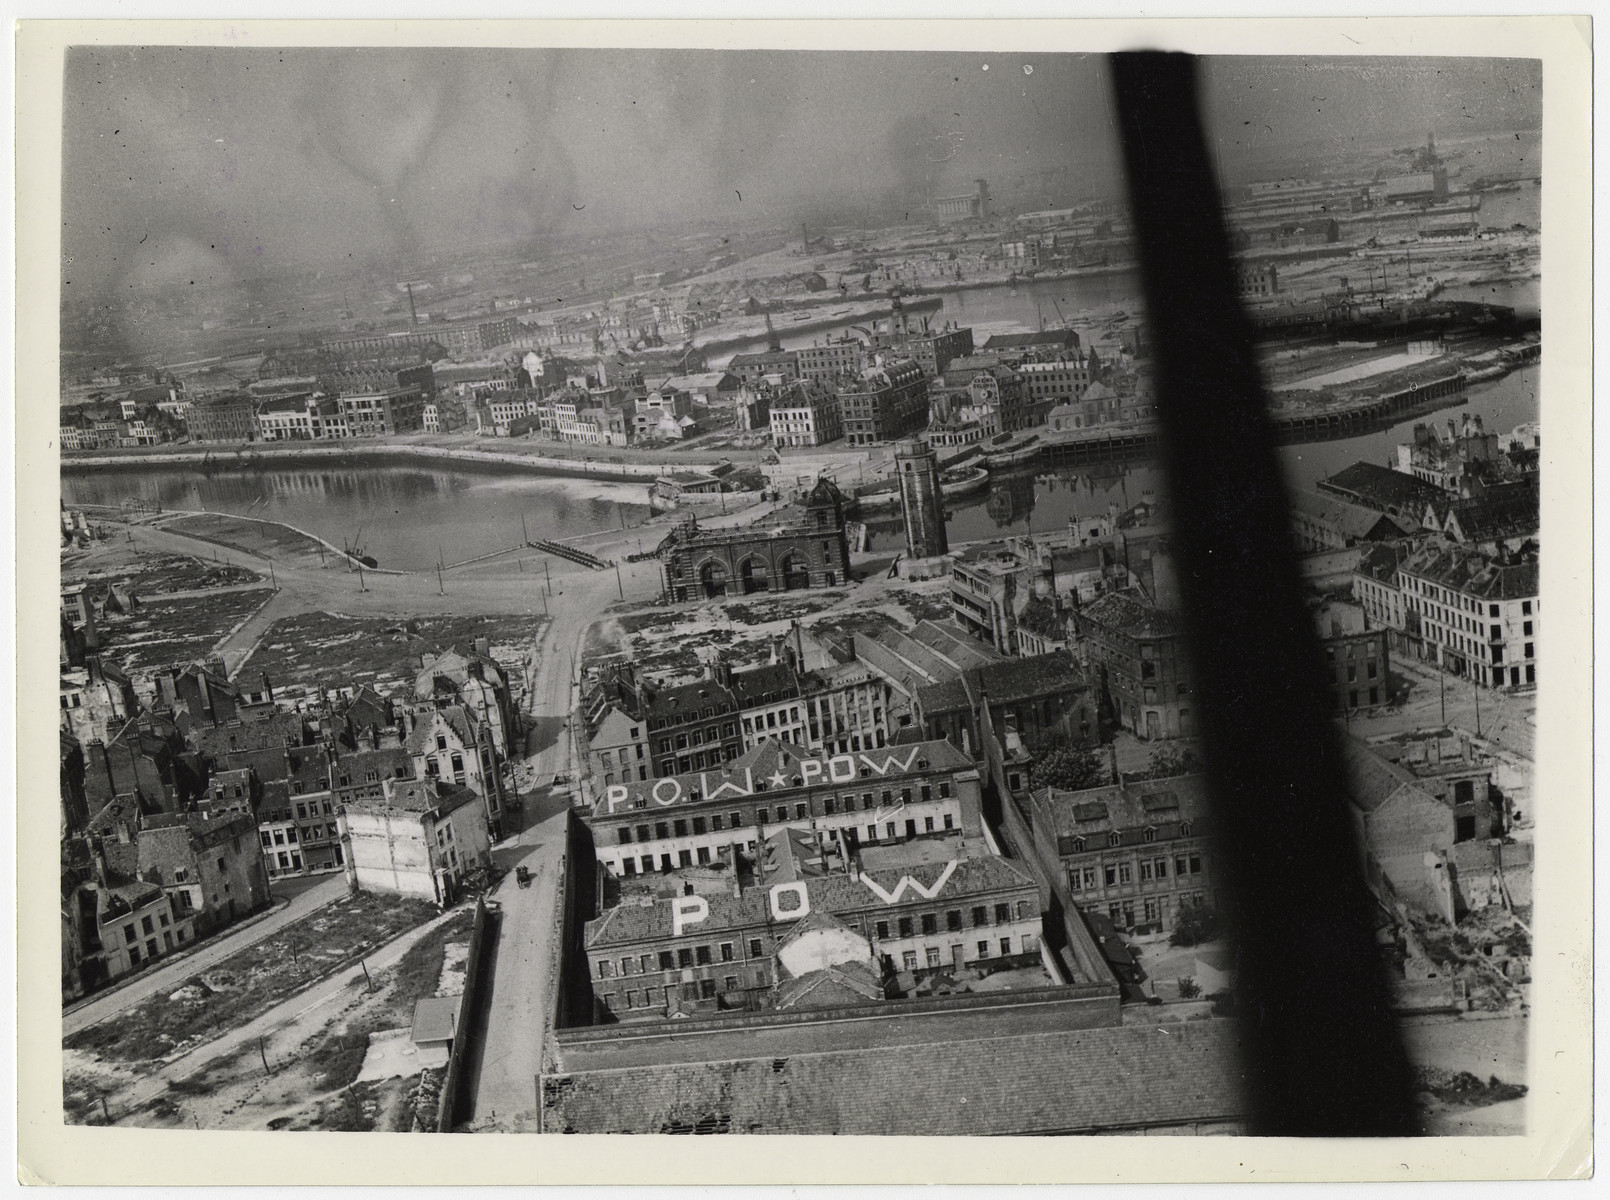 British official aerial photograph of Dunkirk.

Original caption reads: "An R.A.F official photographer flew over Dunkirk on 11.5.45 and took these air views of one of the last of the surrendering German outposts.
Picture shows:- General view over the town of Dunkirk showing prisoner of war signs painted on the roofs of buildings."